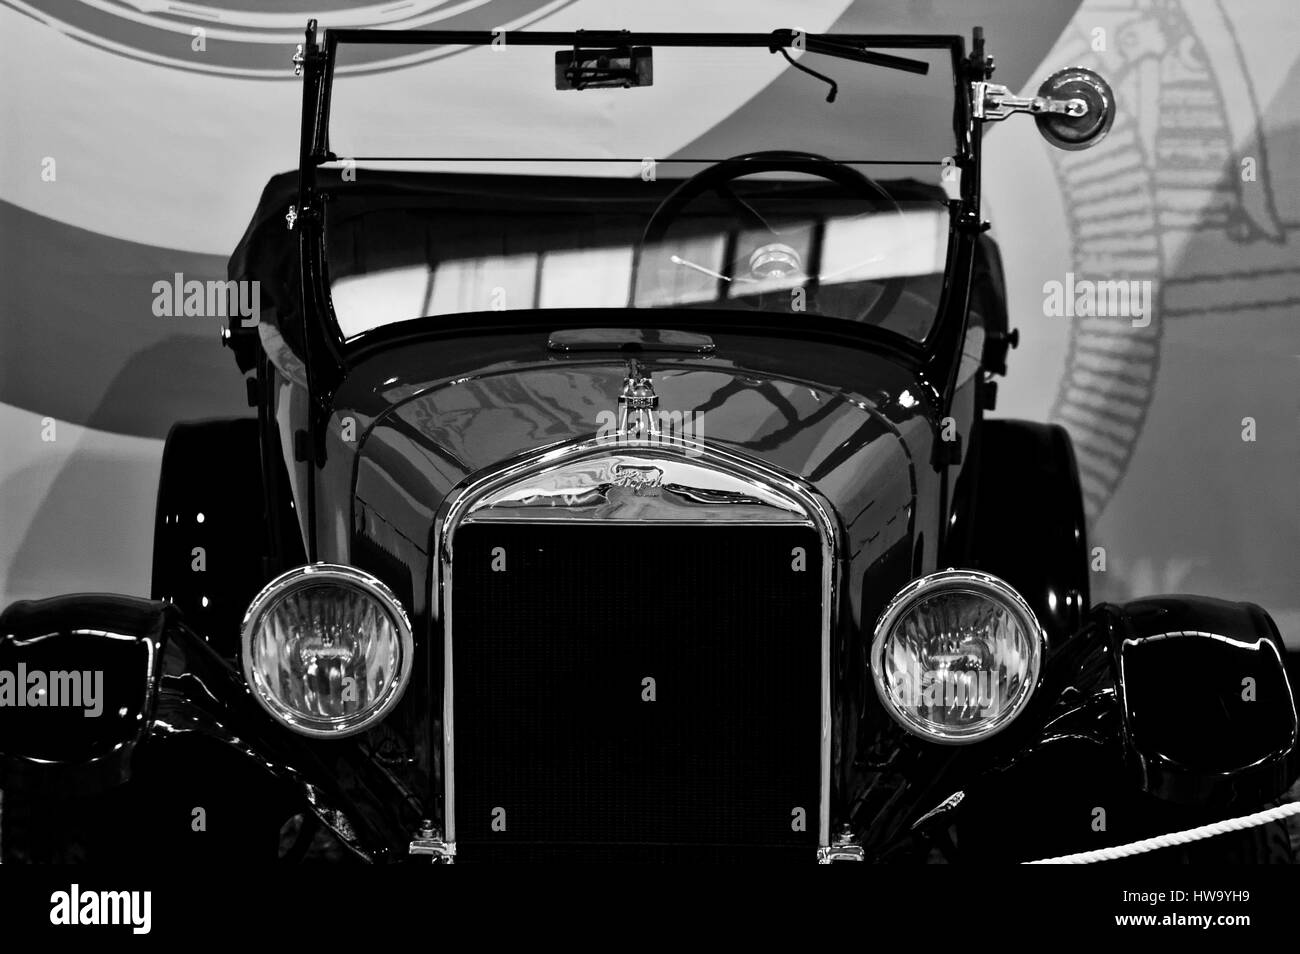 Ford model t illustrations Black and White Stock Photos & Images - Alamy